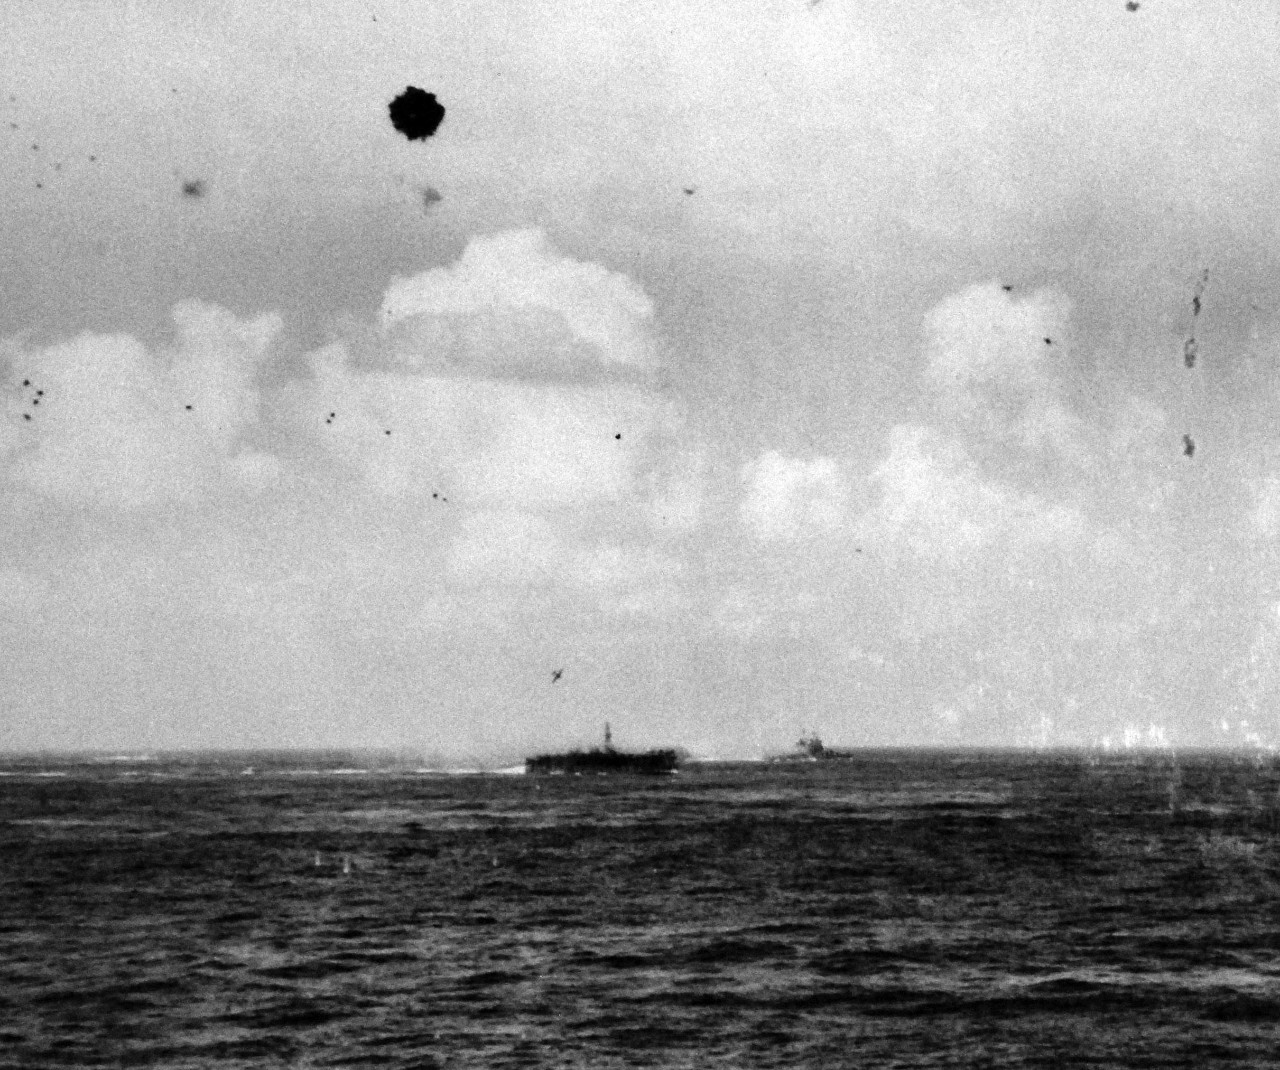 80-G-373773:    Okinawa Campaign, Pre-Landing Bombardment, Japanese Kamikaze, March 1945.    Near miss by Japanese plane on USS Bataan (CVL-29), unit of Task Force off Okinawa in the Ryukyu Islands.   As seen from USS Essex (CV-9),  Marh 17, 1945.  Official U.S. Navy Photograph, now in the collection of the National Archives.   (2014/5/8).   